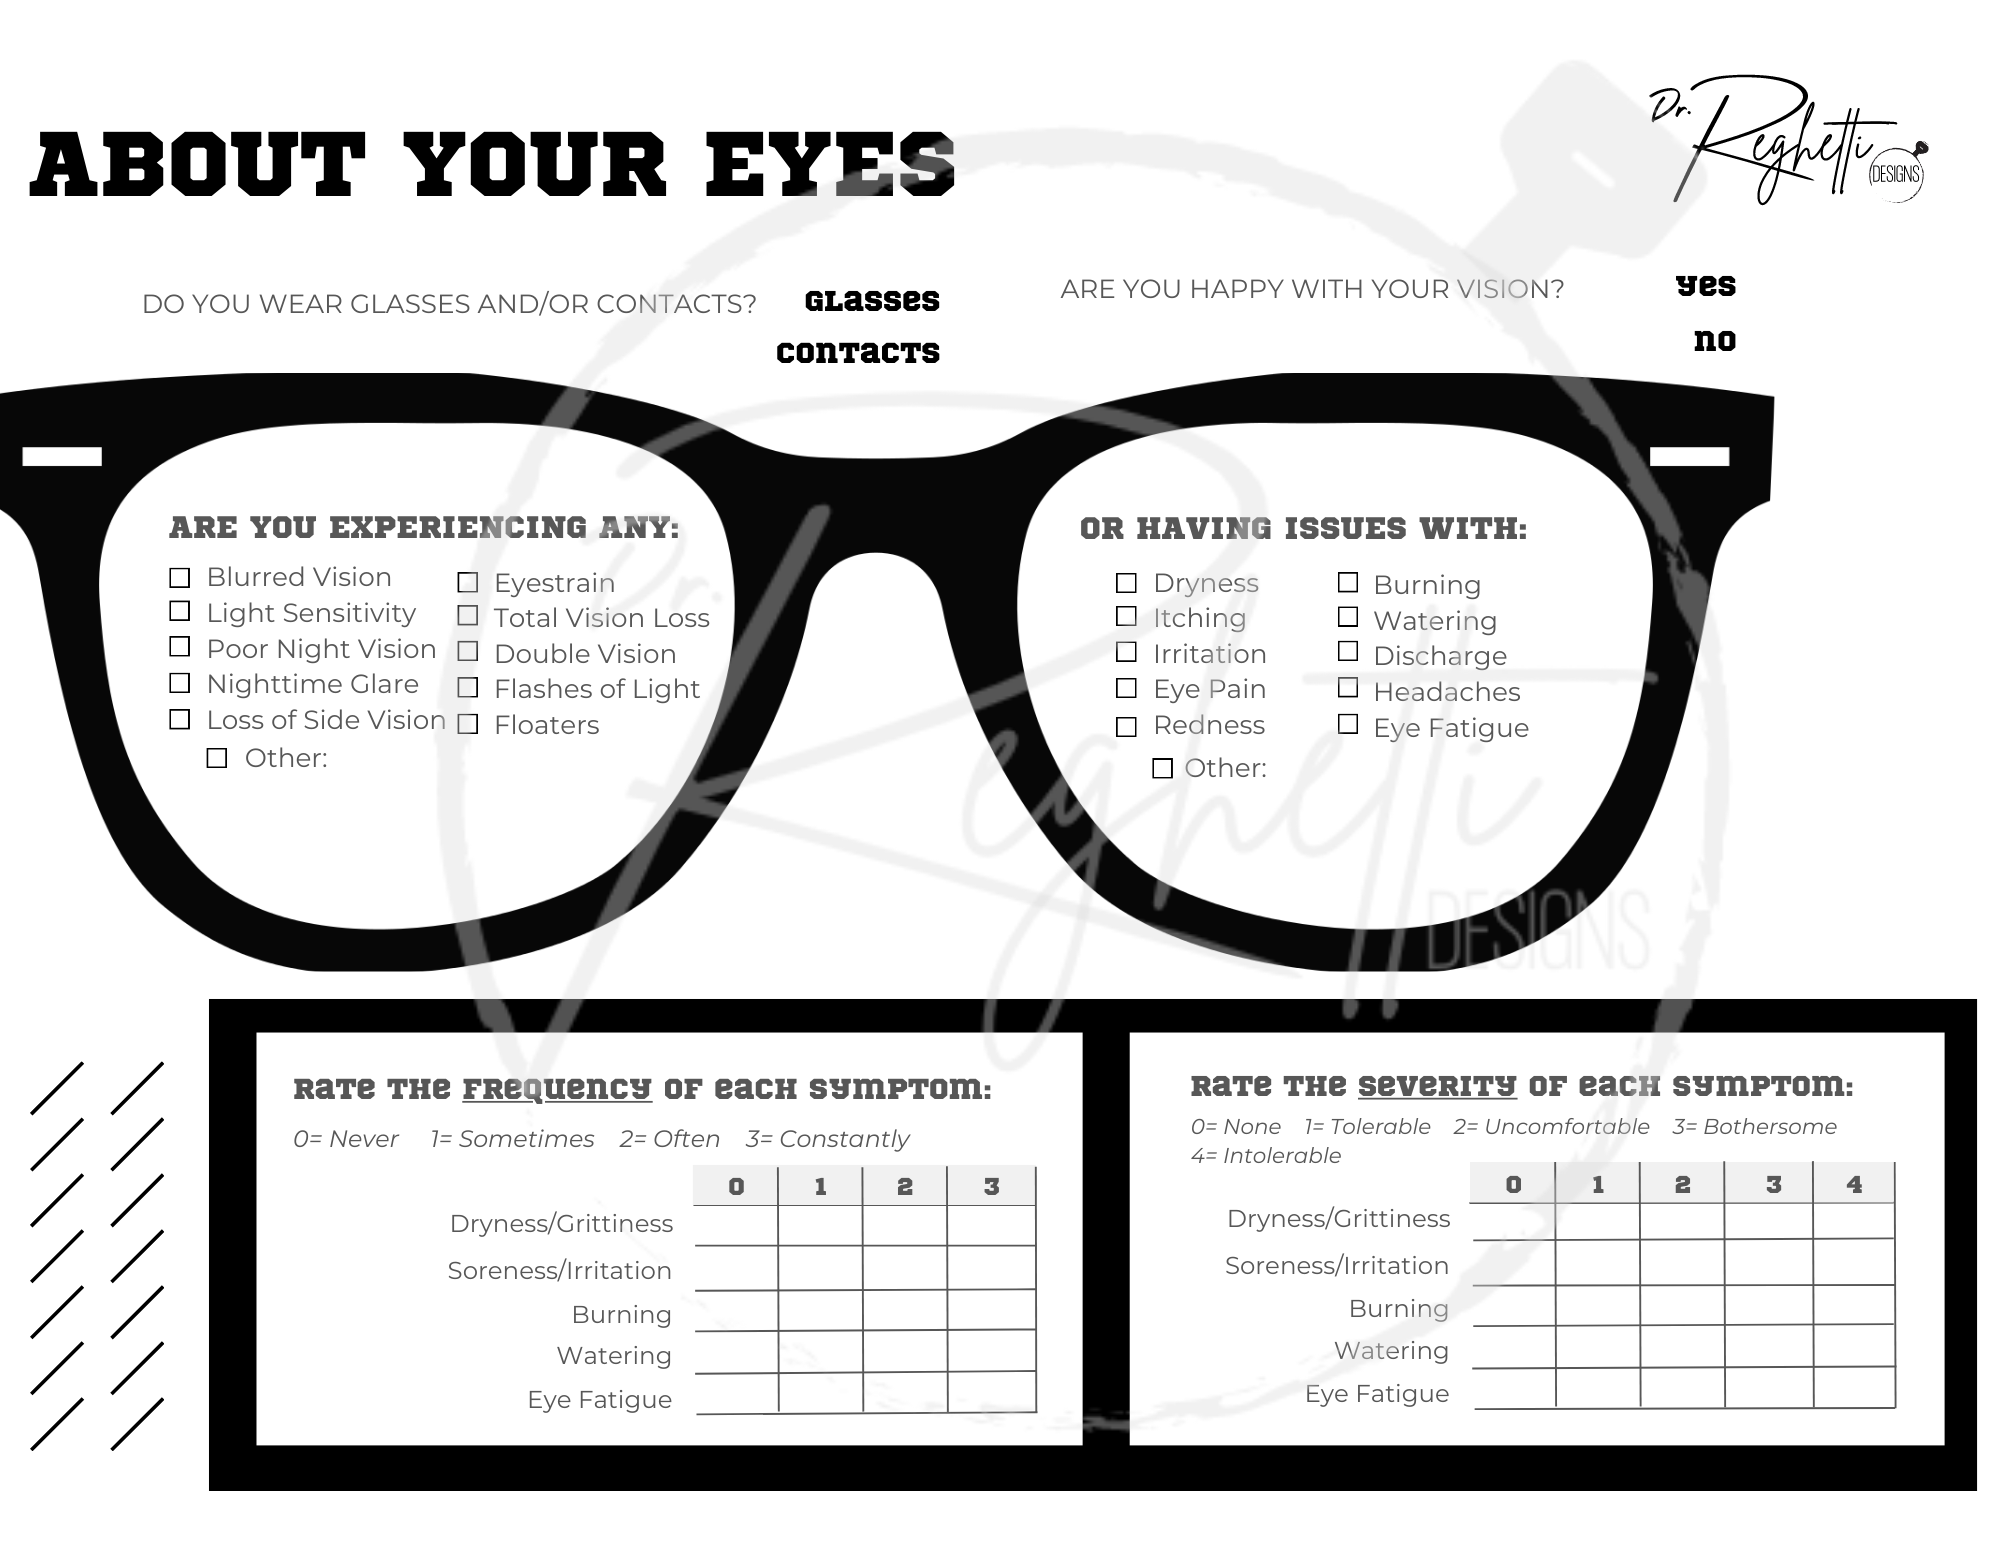 modern patient intake form for optometrists